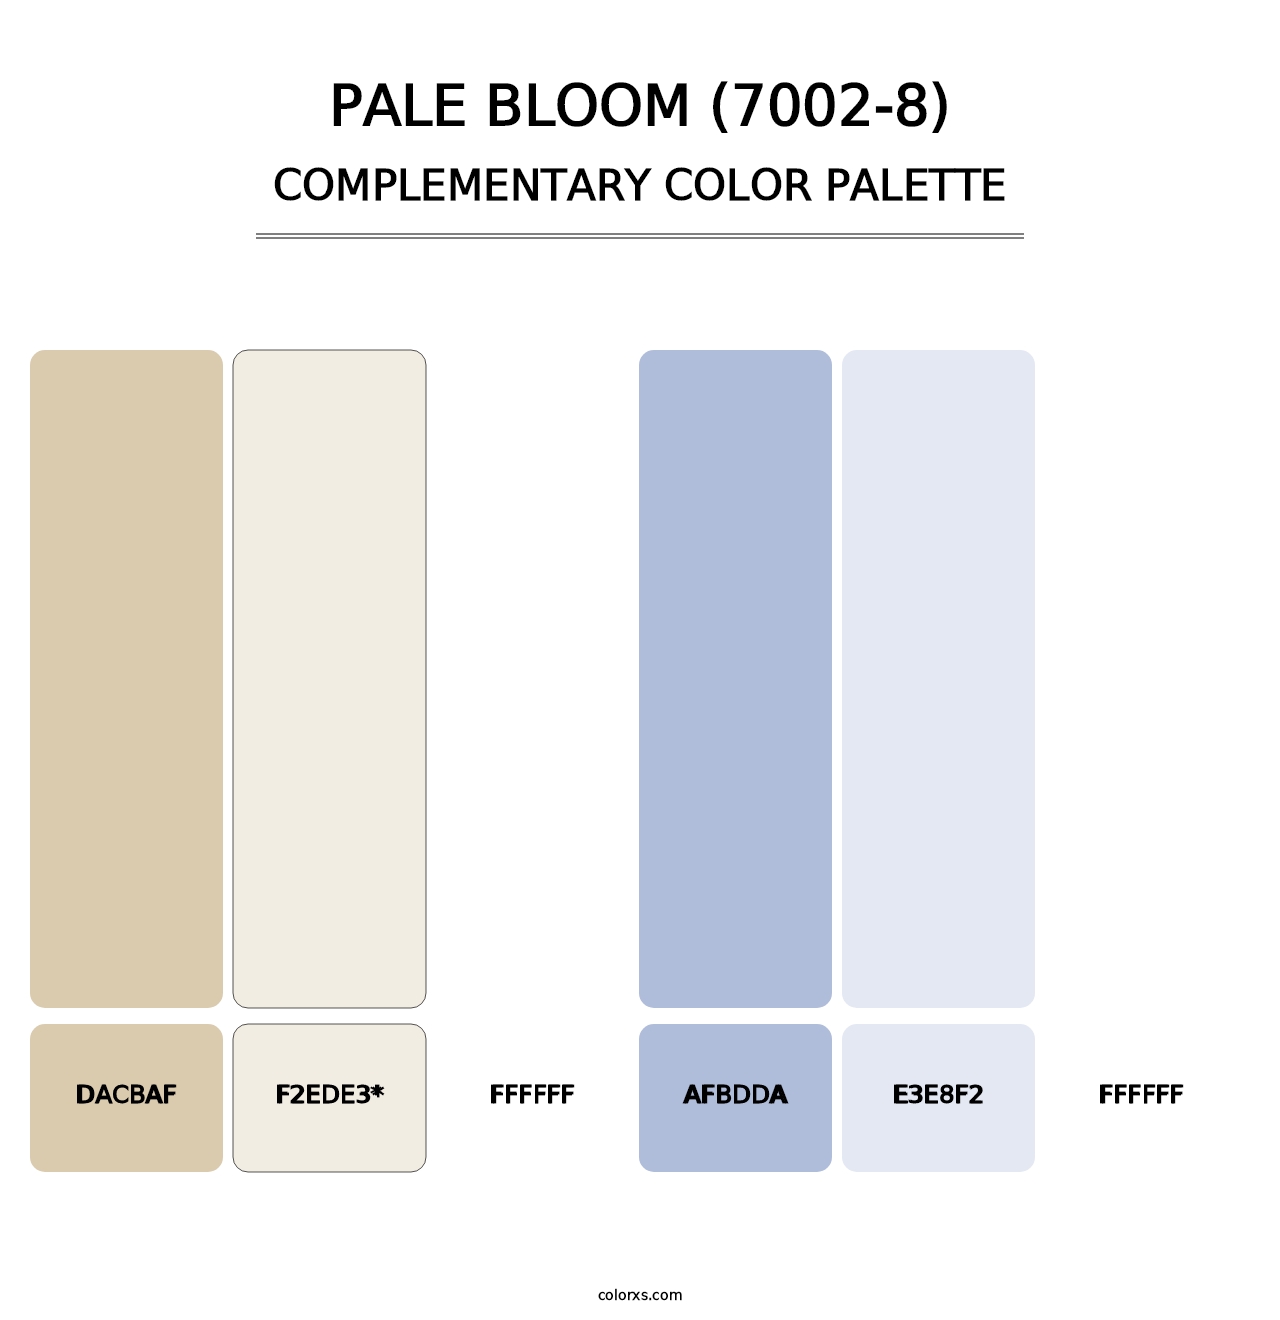 Pale Bloom (7002-8) - Complementary Color Palette